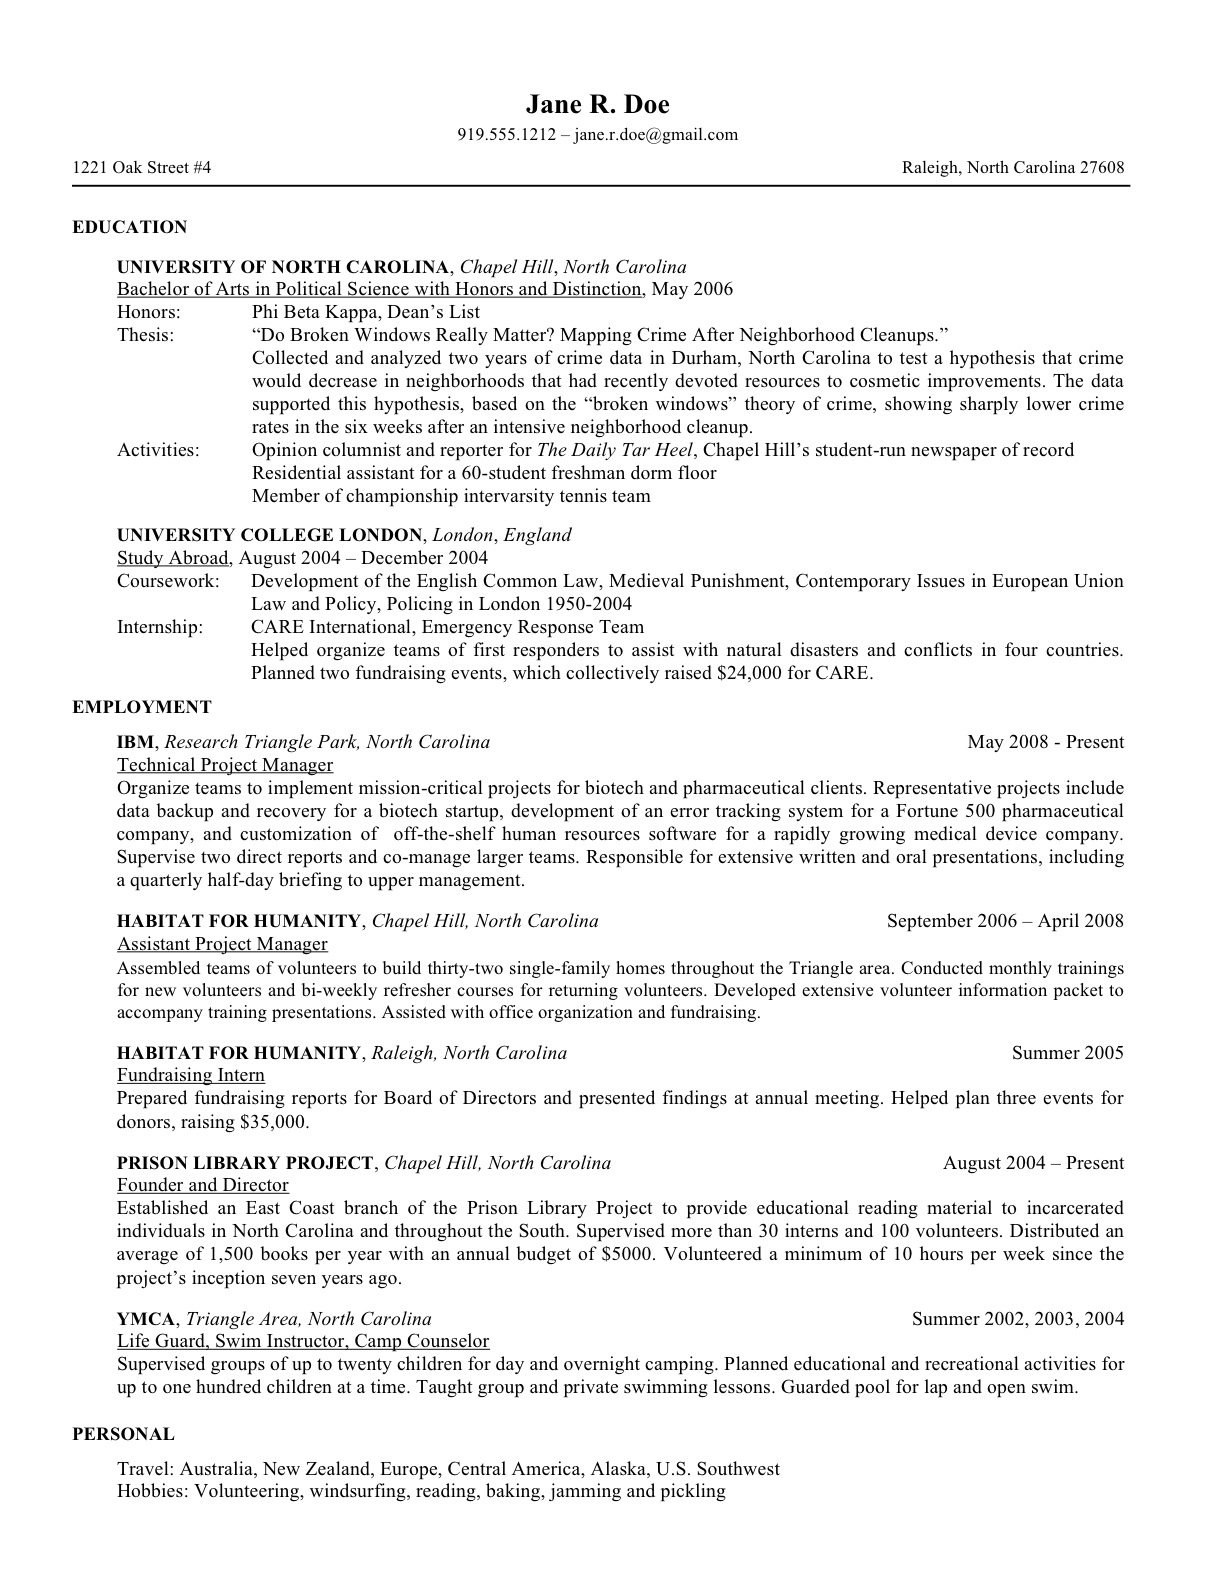 resume format for law school application